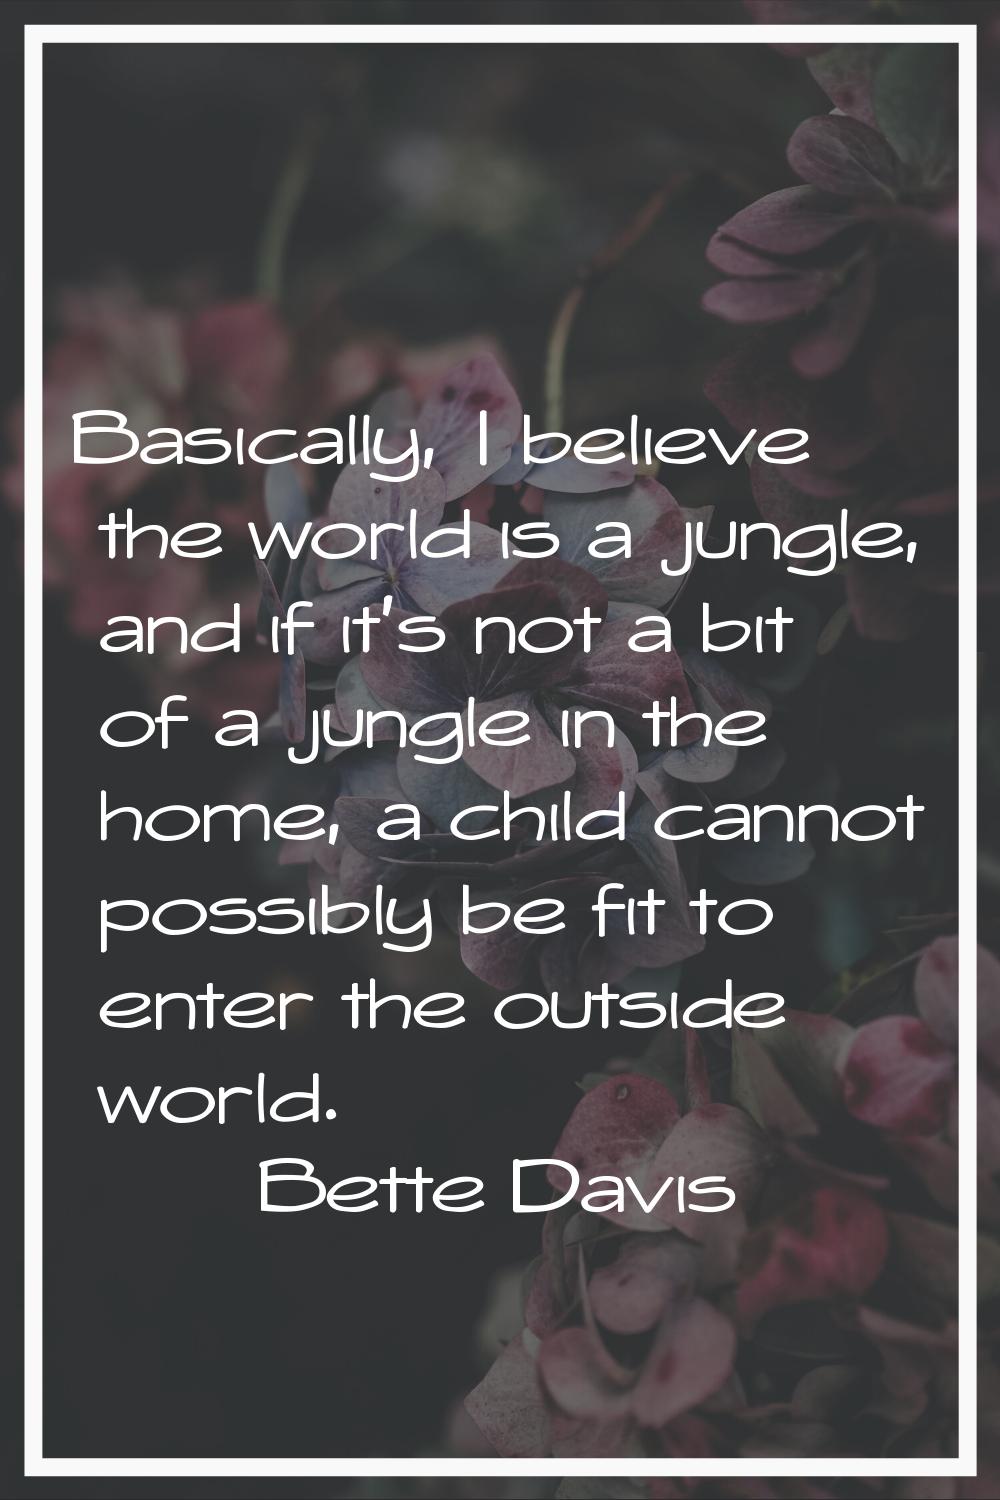 Basically, I believe the world is a jungle, and if it's not a bit of a jungle in the home, a child 